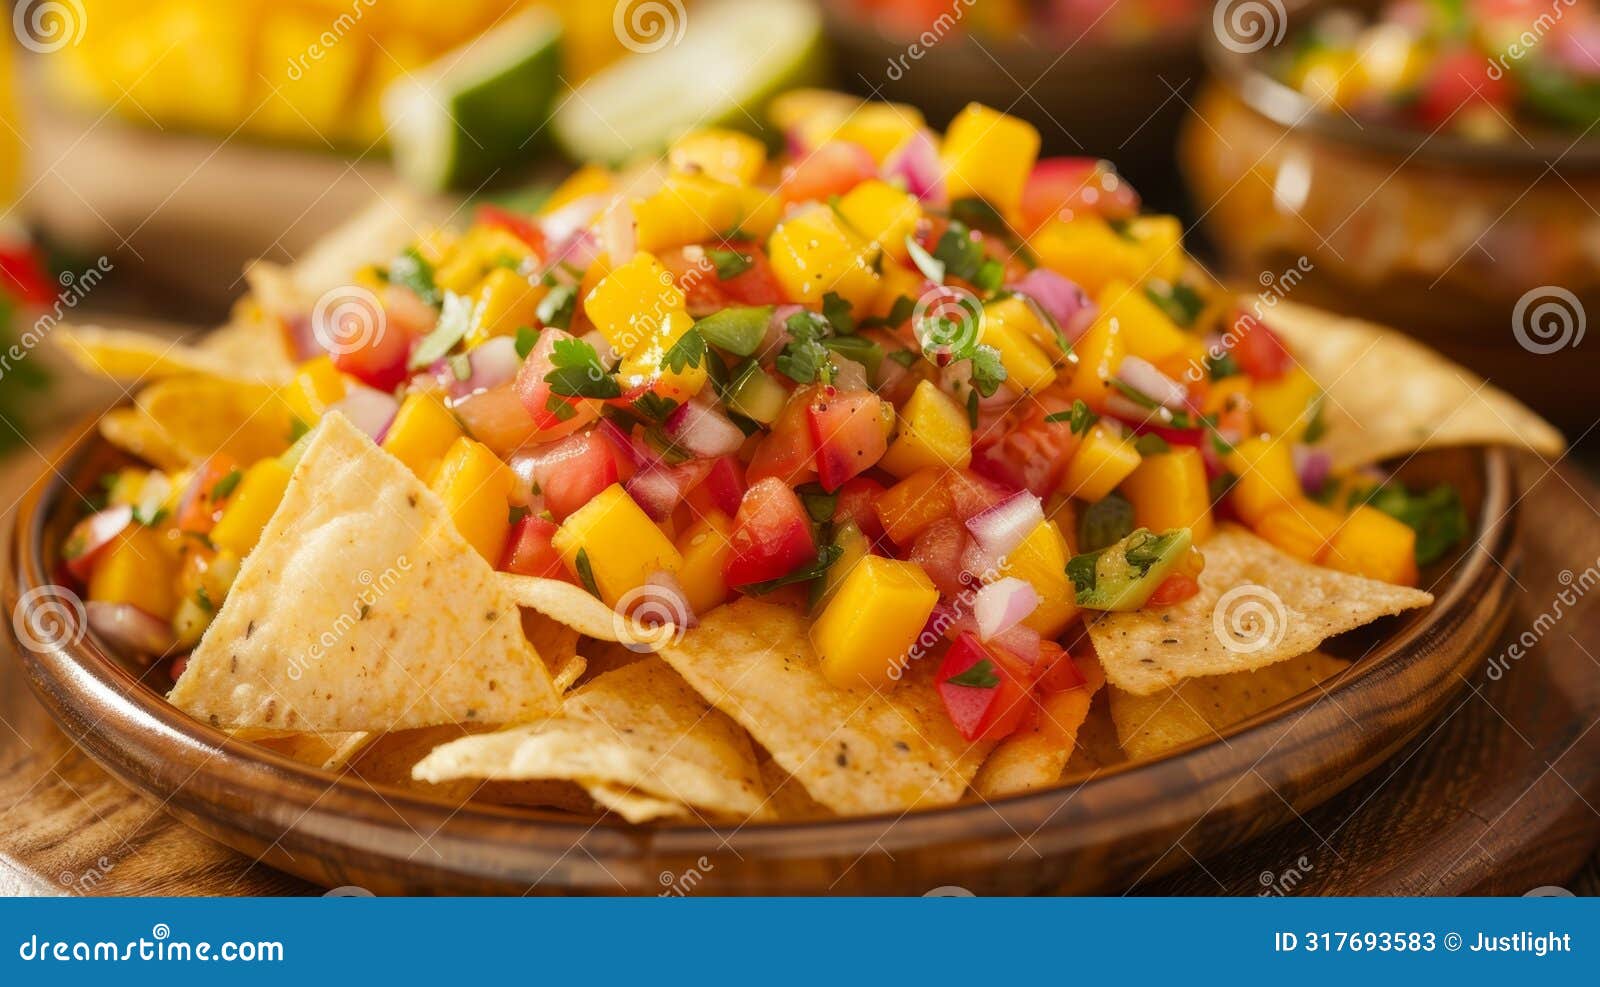 satisfy your taste buds with our y mango salsa a perfect pairing for our crispy corn chips